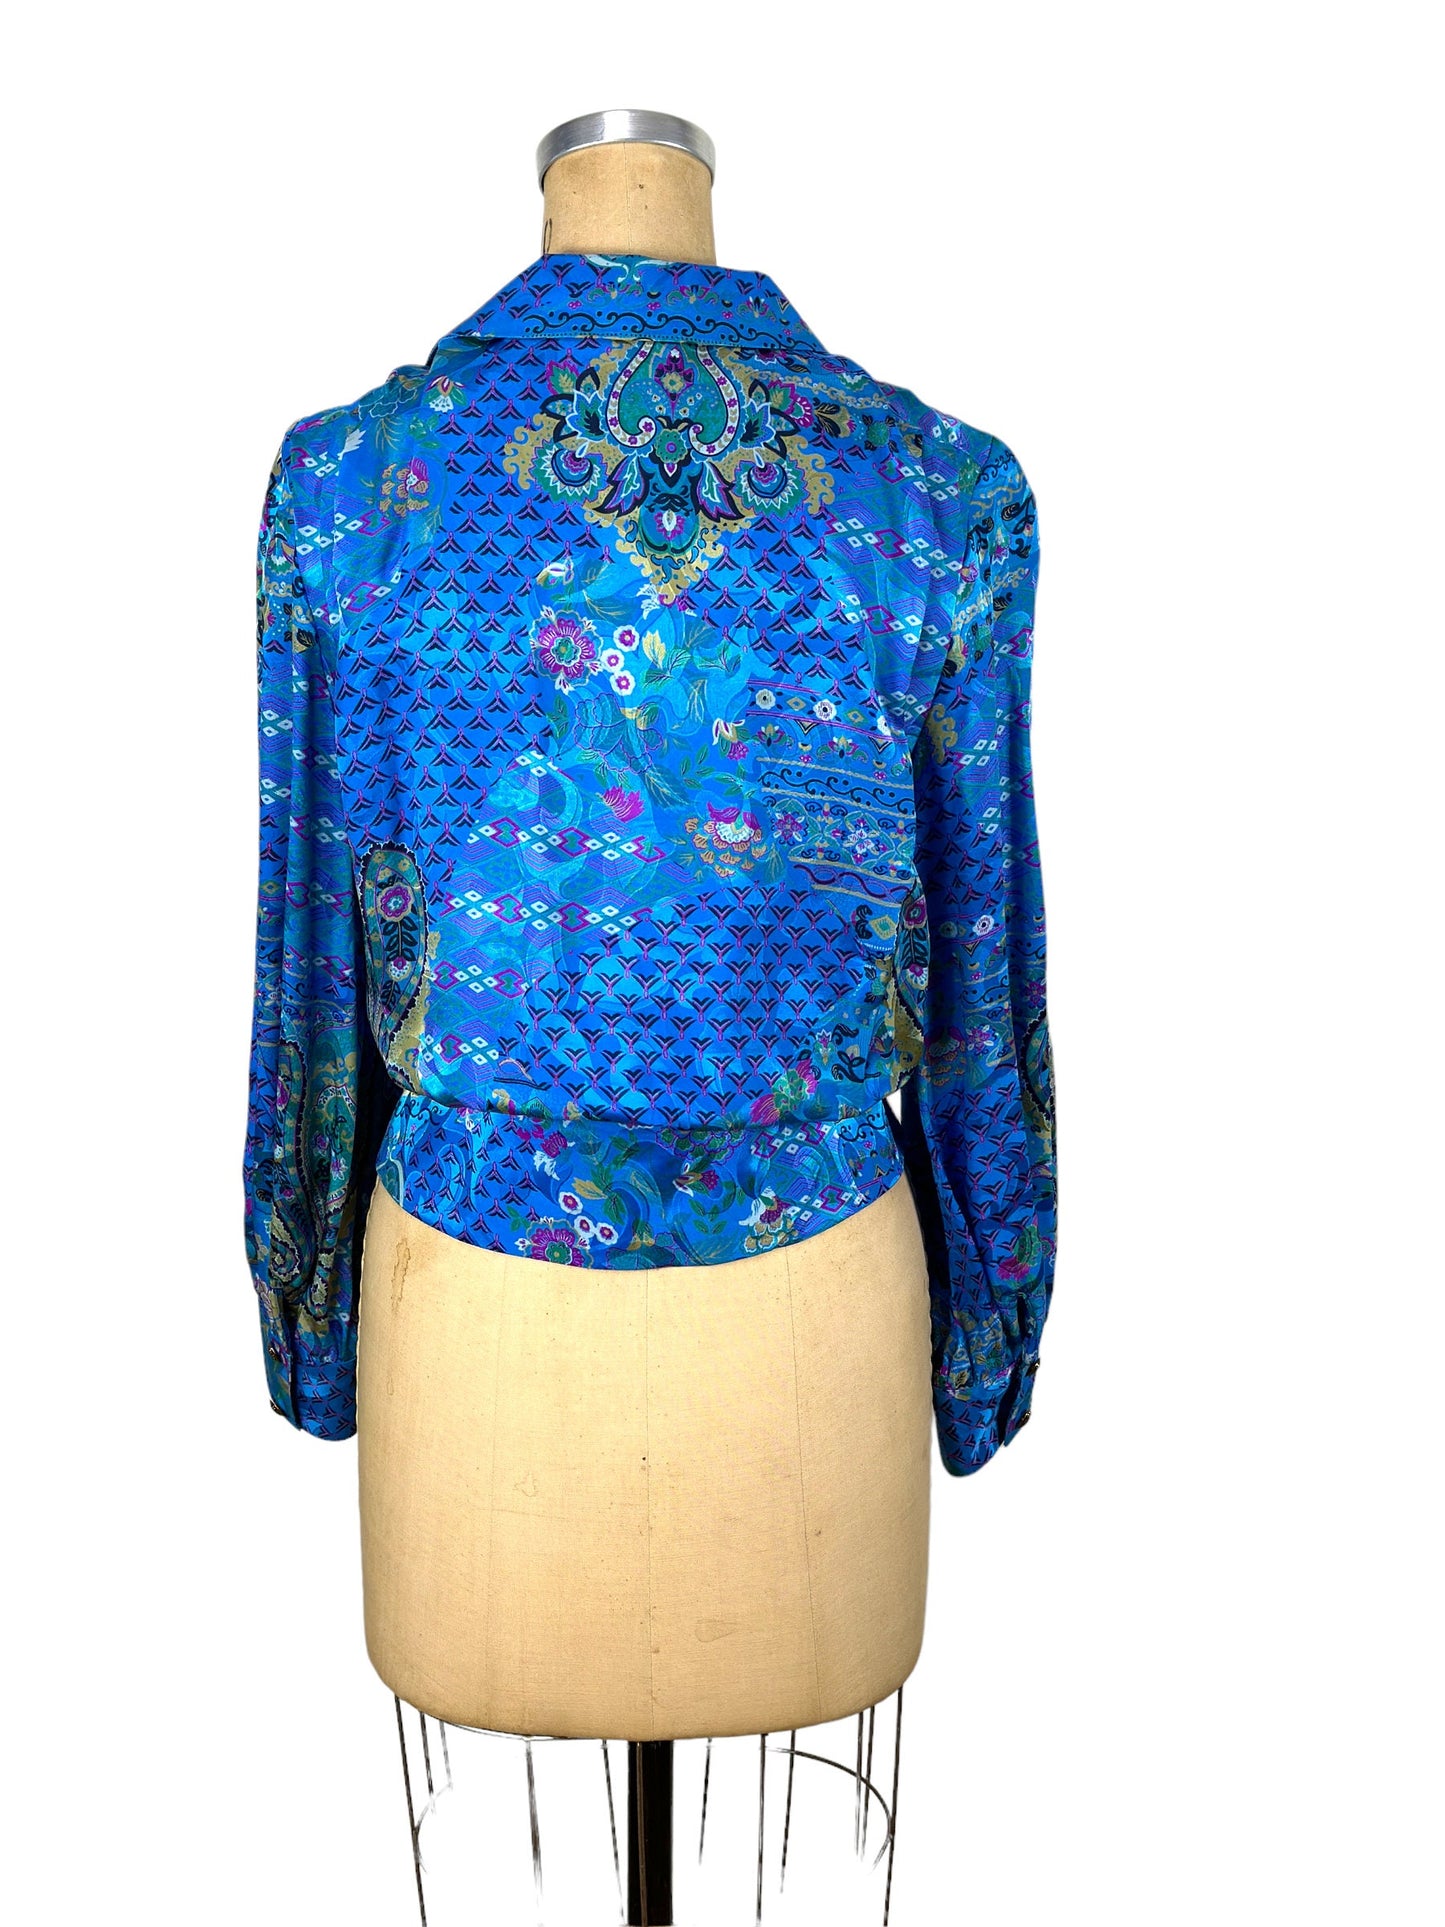 1980s silk blouse with peplum Size 14 by Anne Crimmins for Umi